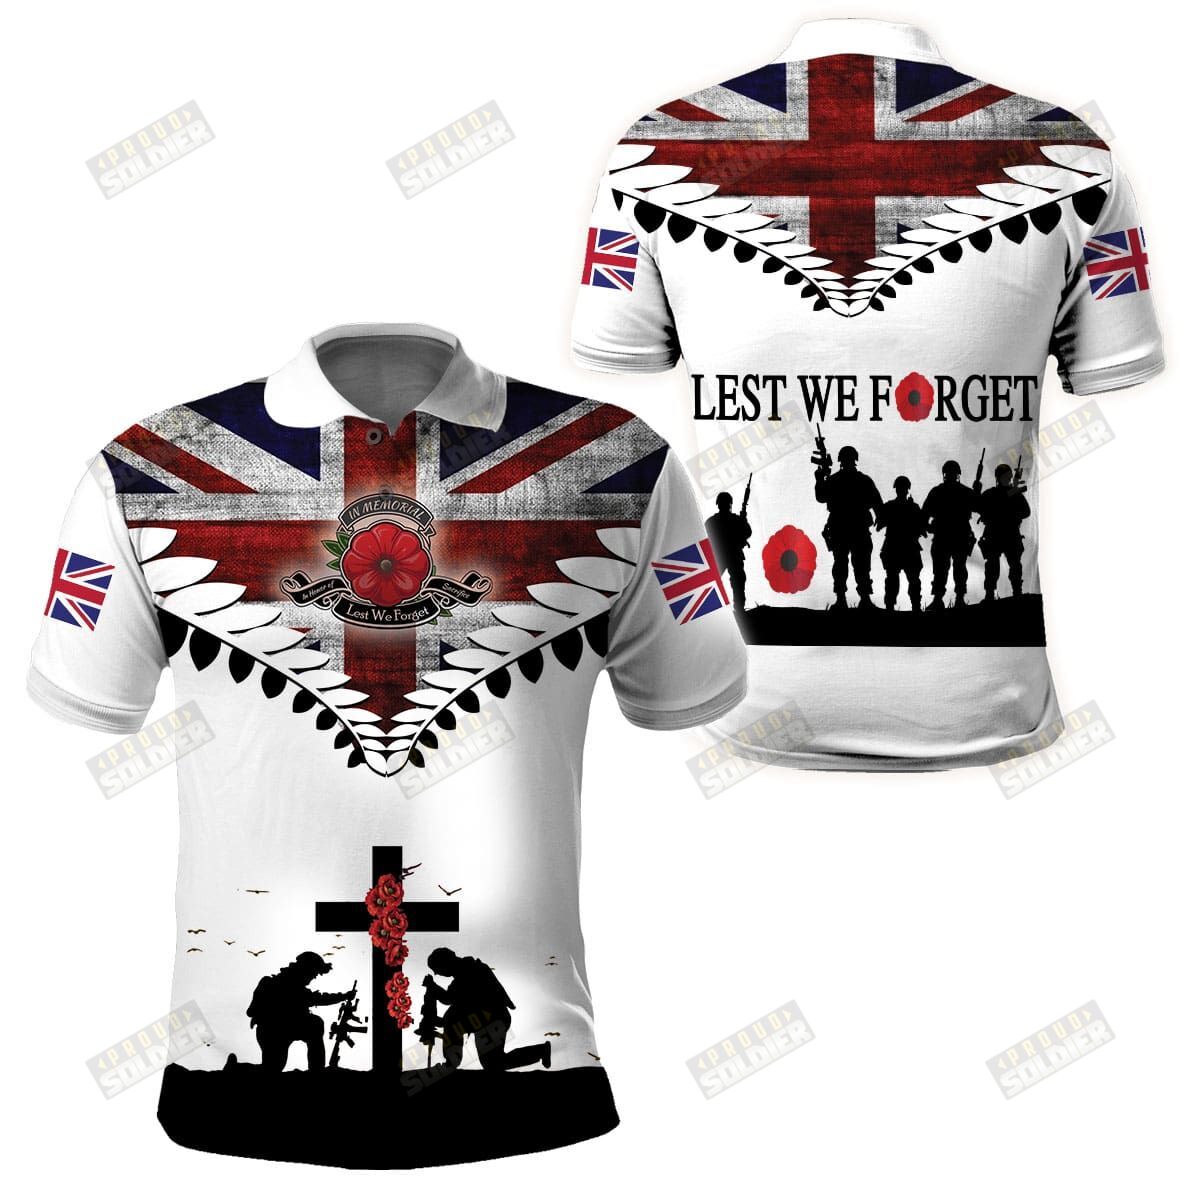 UK veterans lest we forget 3d polo shirt – LIMITED EDITION